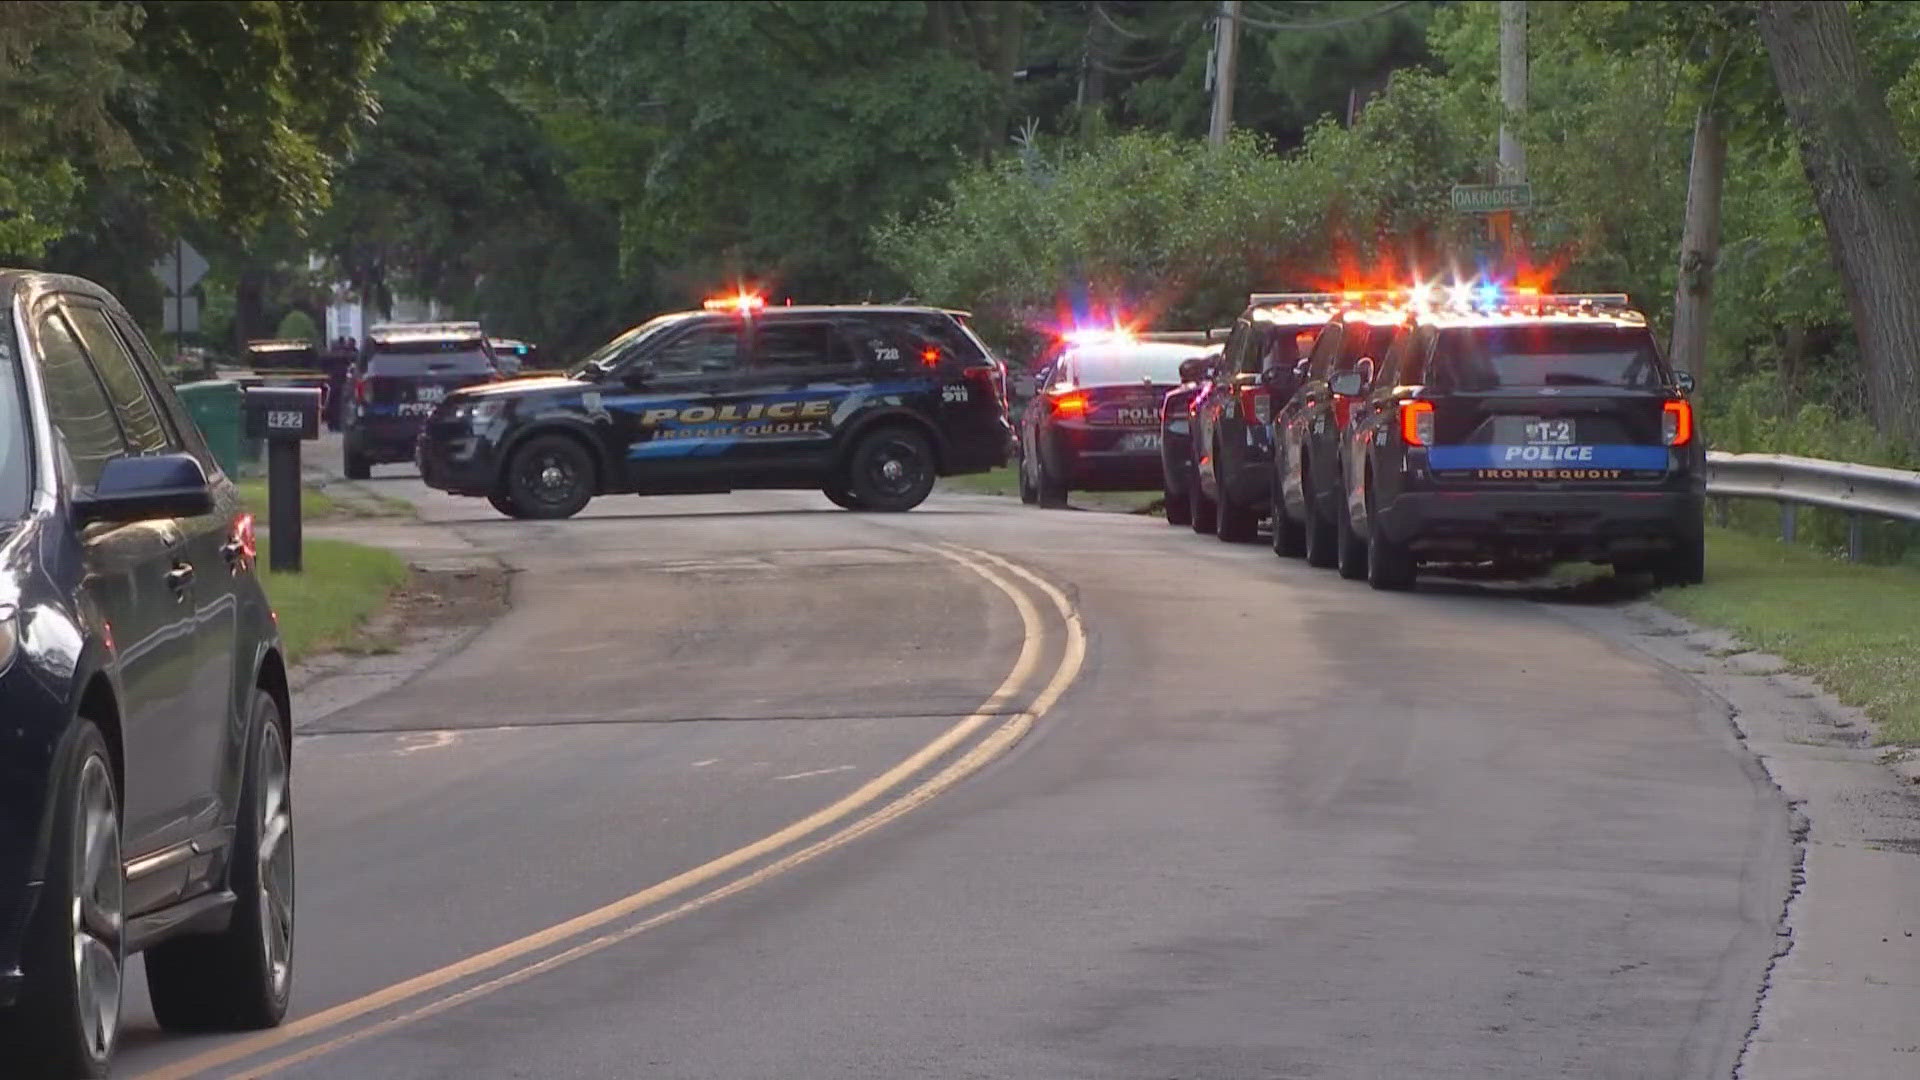 Troopers said they were searching for a person of interest connected to a homicide investigation in Irondequoit, who they thought might be in the park.